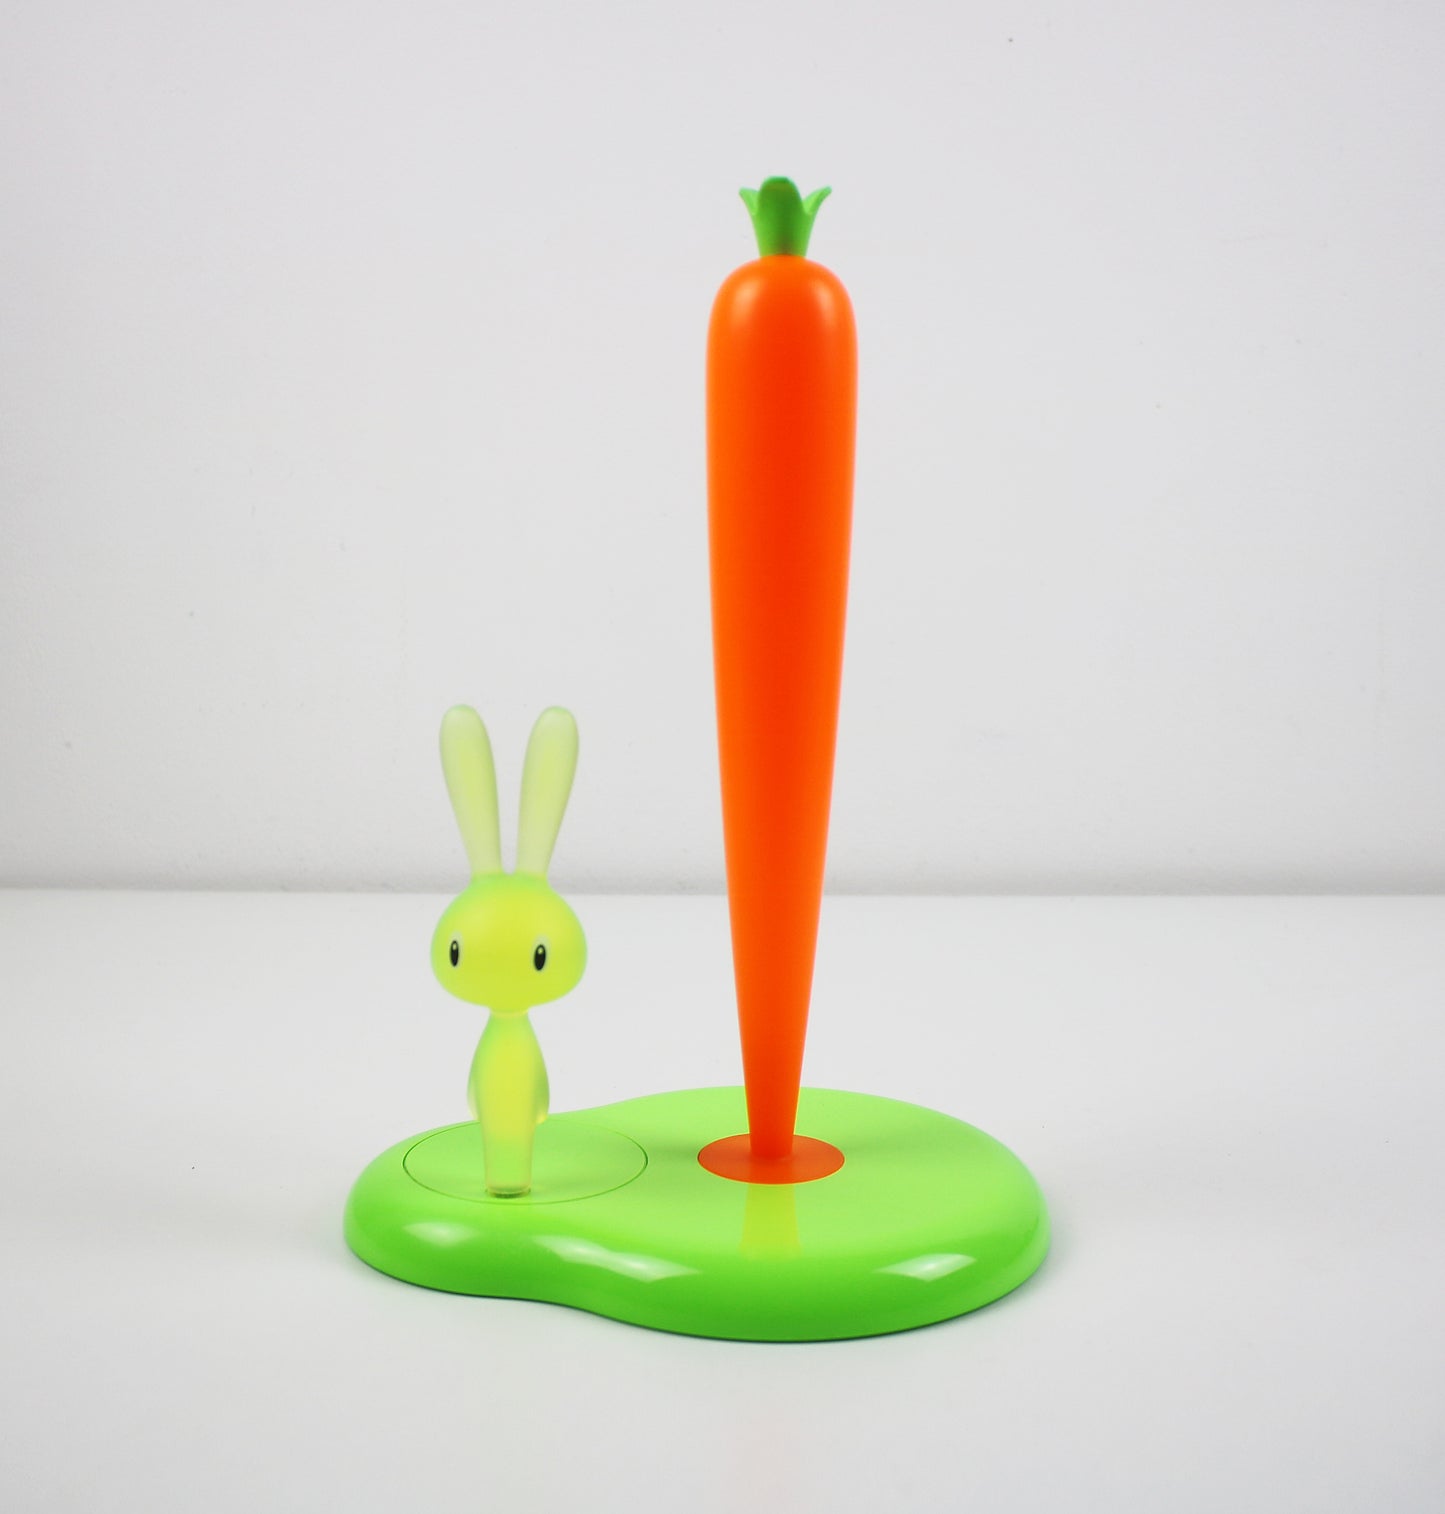 Preloved resin carrot and rabbit kitchen roll towel holder by Stefano Giovannoni for Alessi - note sizes.